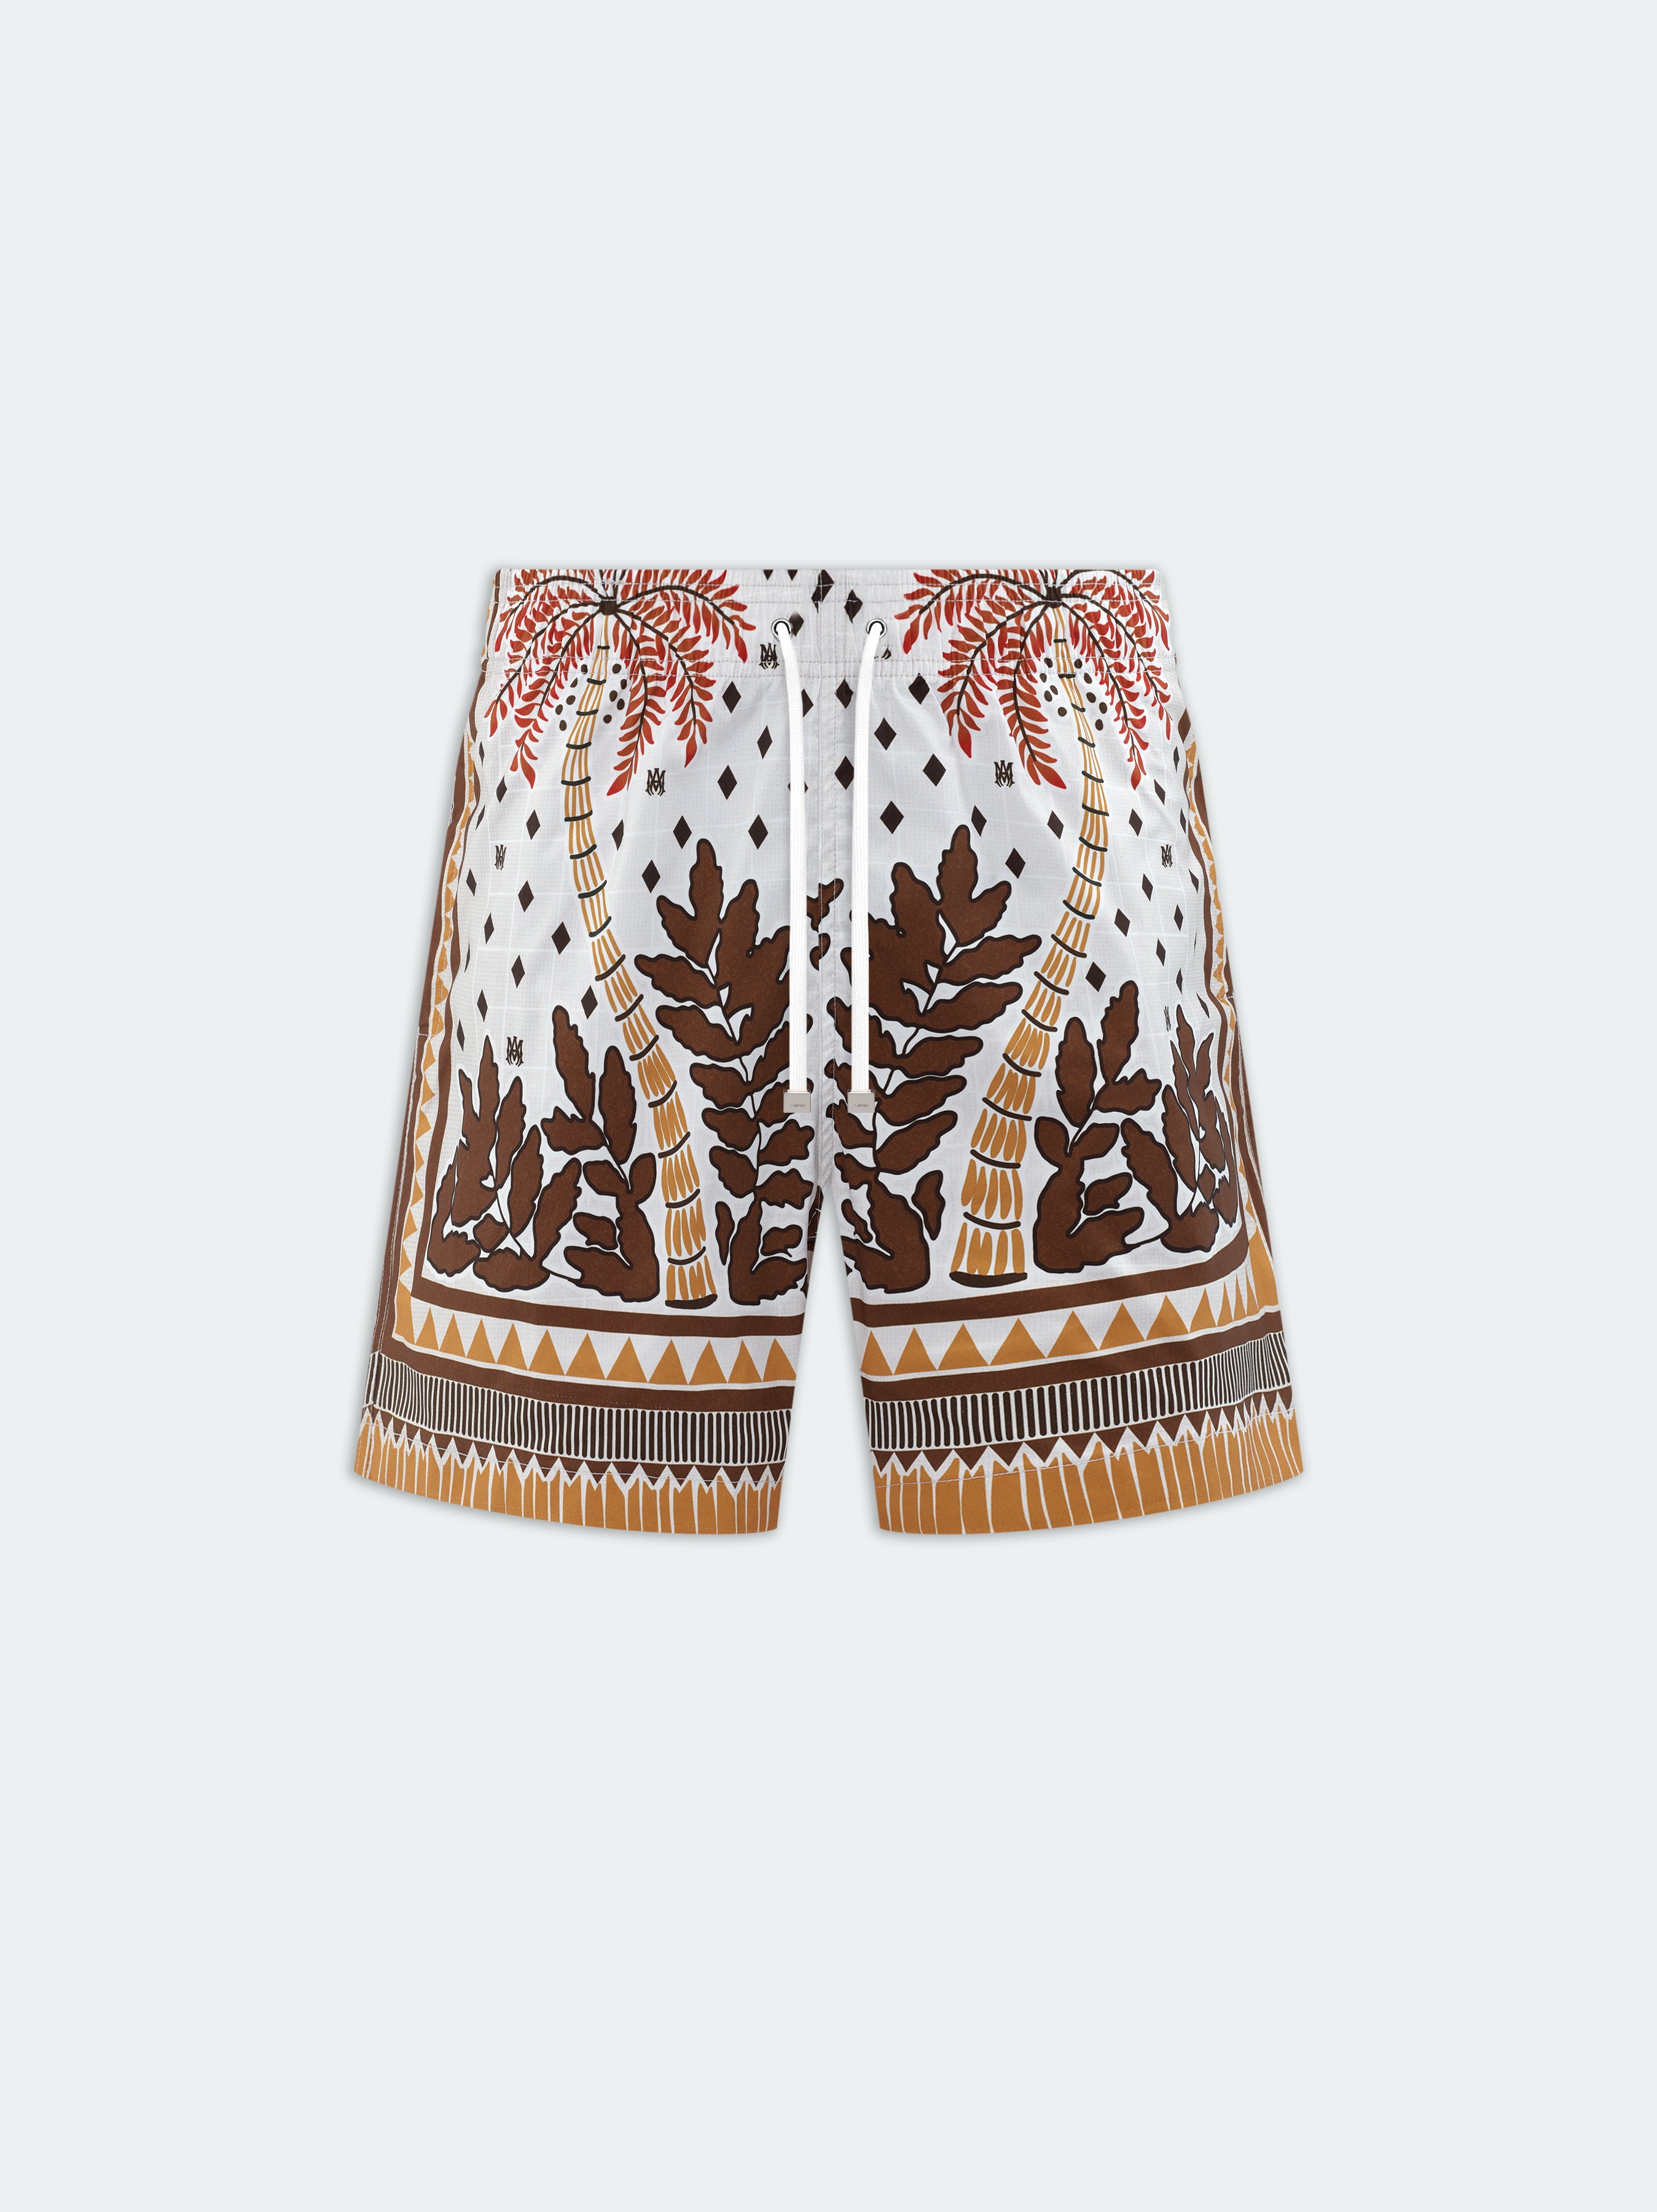 Product PALM TREE SWIM TRUNK - Harvest Gold featured image